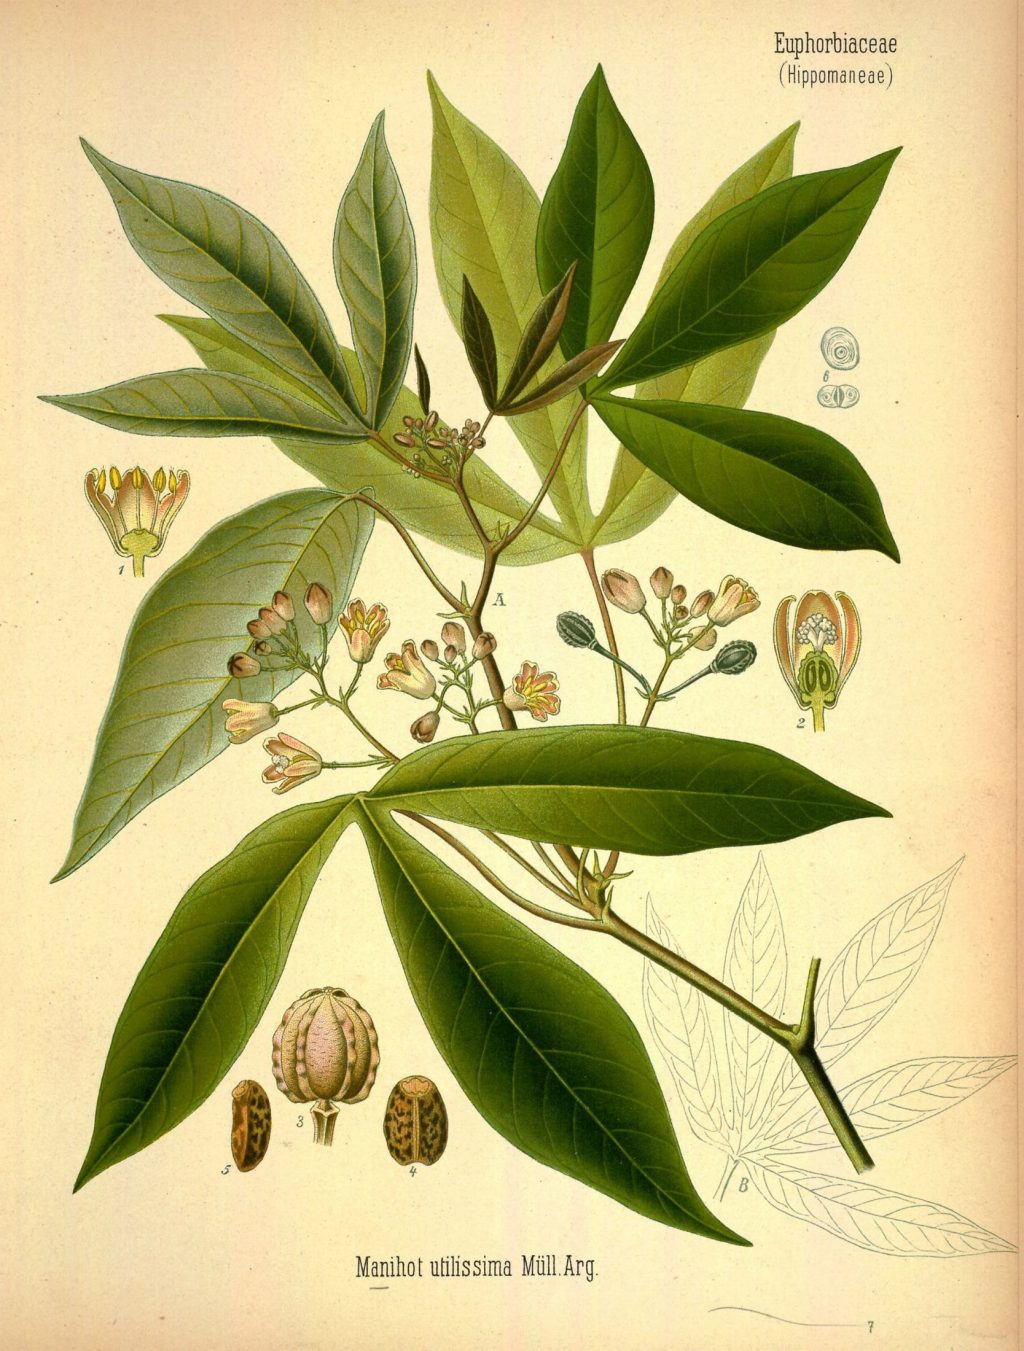 Vintage illustration of a cassava tree, with prominent leaves, fruits and flowers